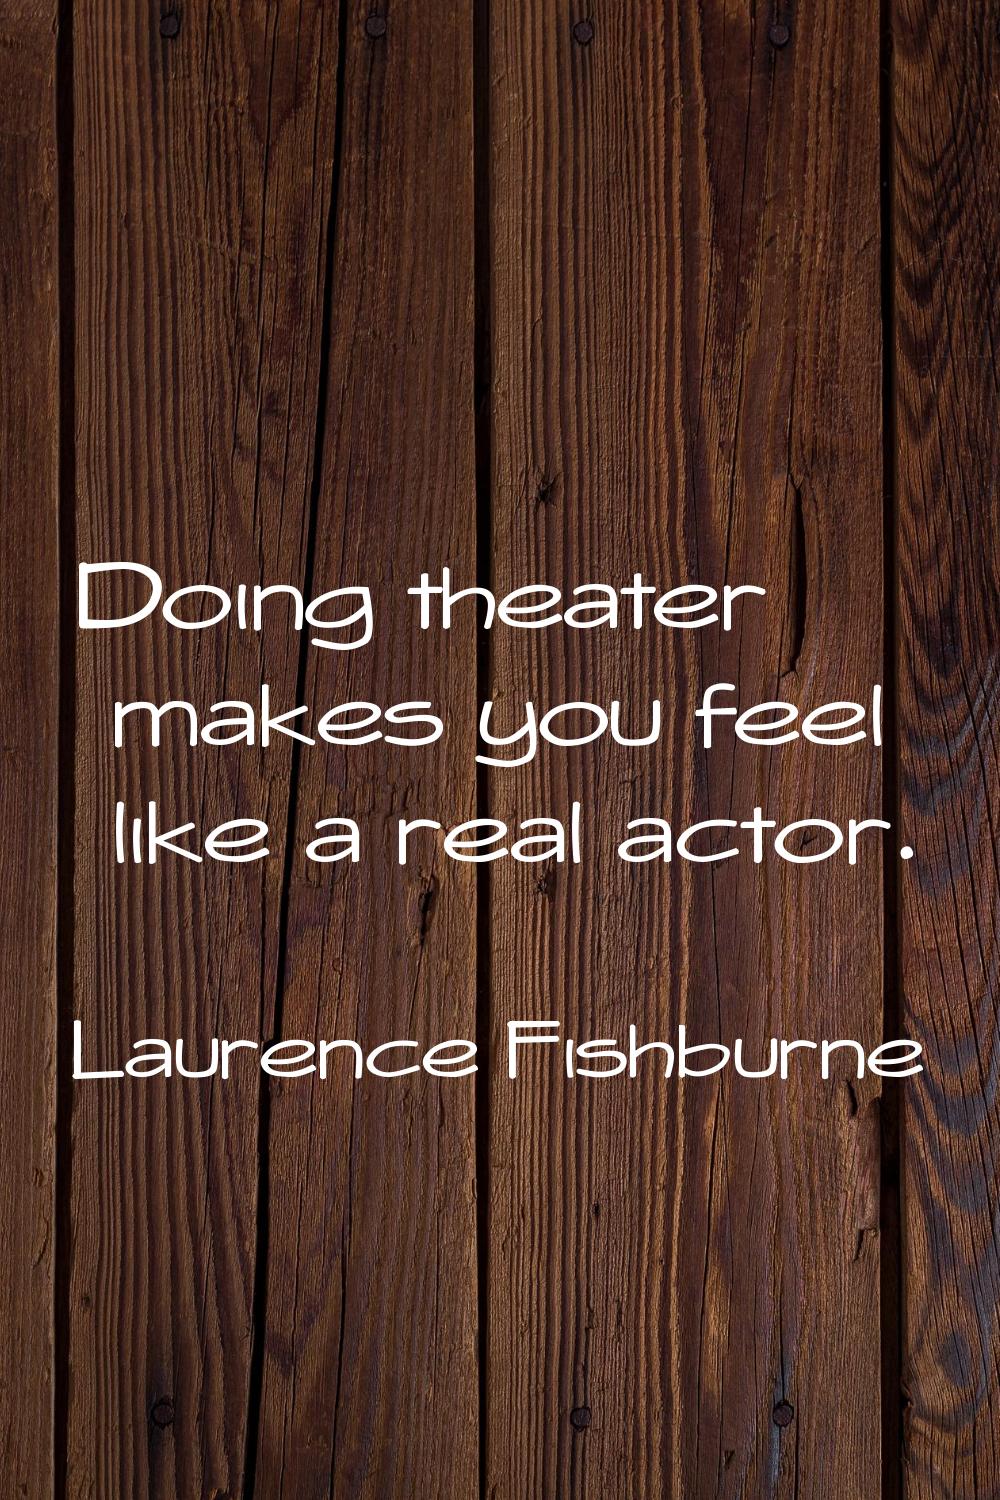 Doing theater makes you feel like a real actor.